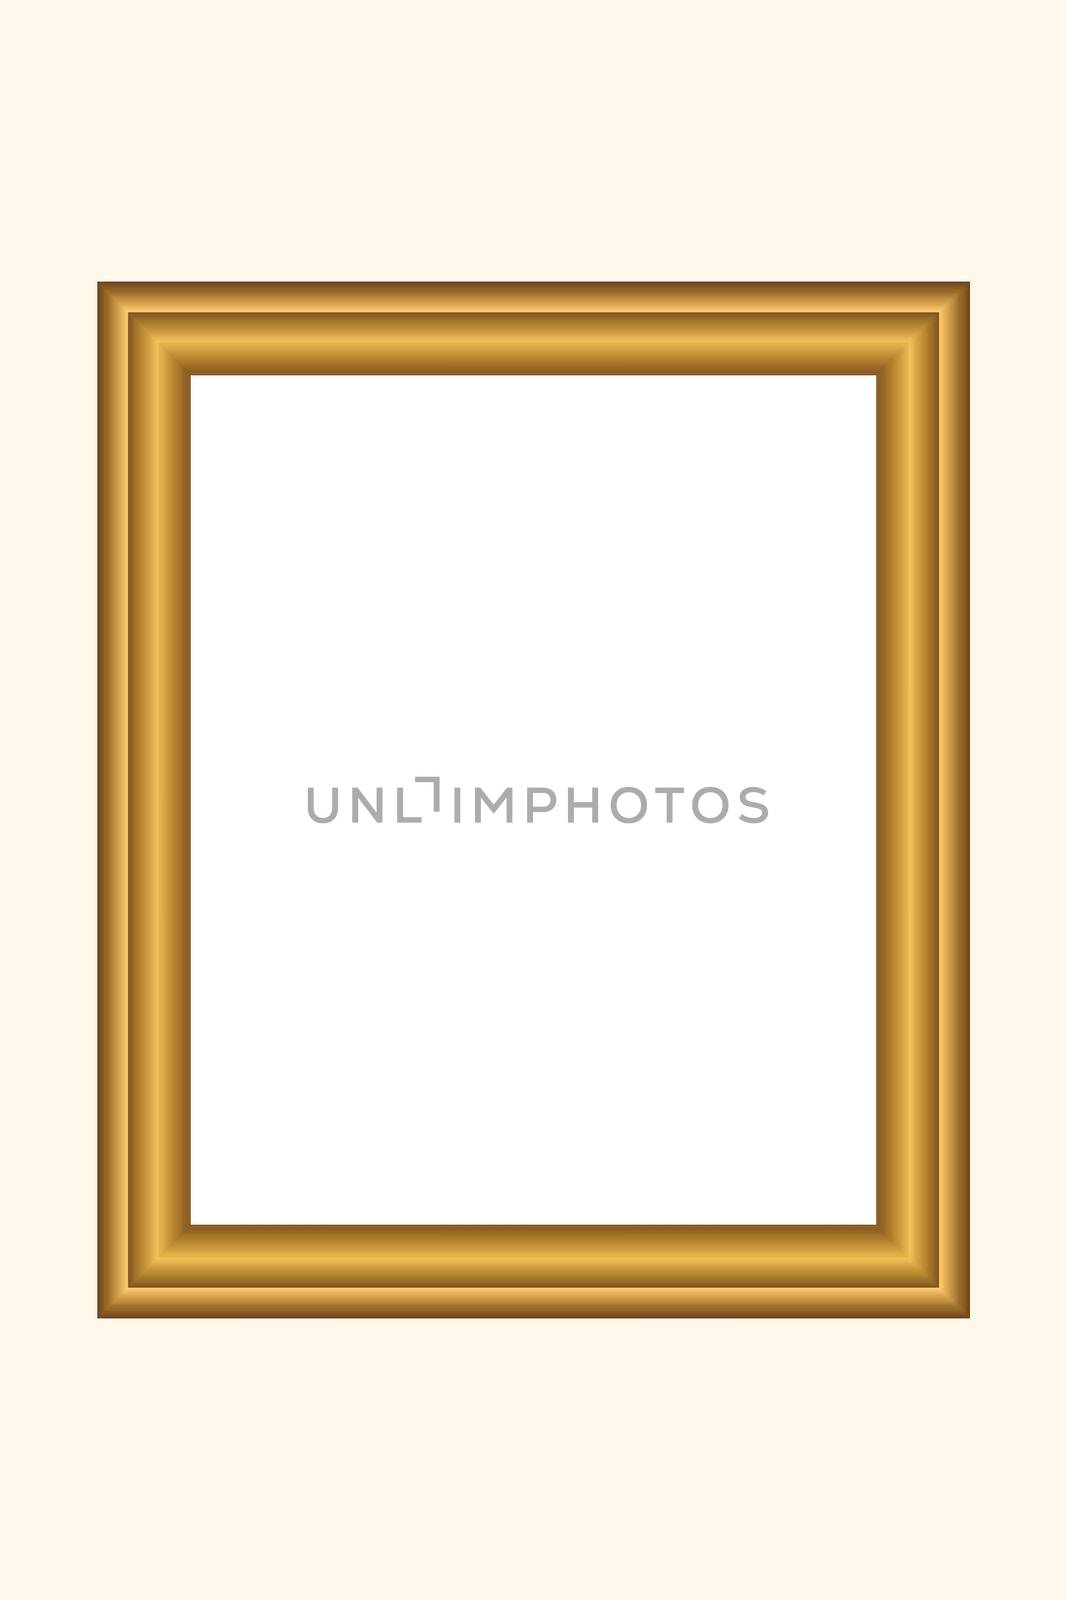 Squared golden vintage wooden frame for your design. Vintage cover. Place for text. Vintage antique gold beautiful rectangular frames for paintings or photographs. Template vector illustration by allaku